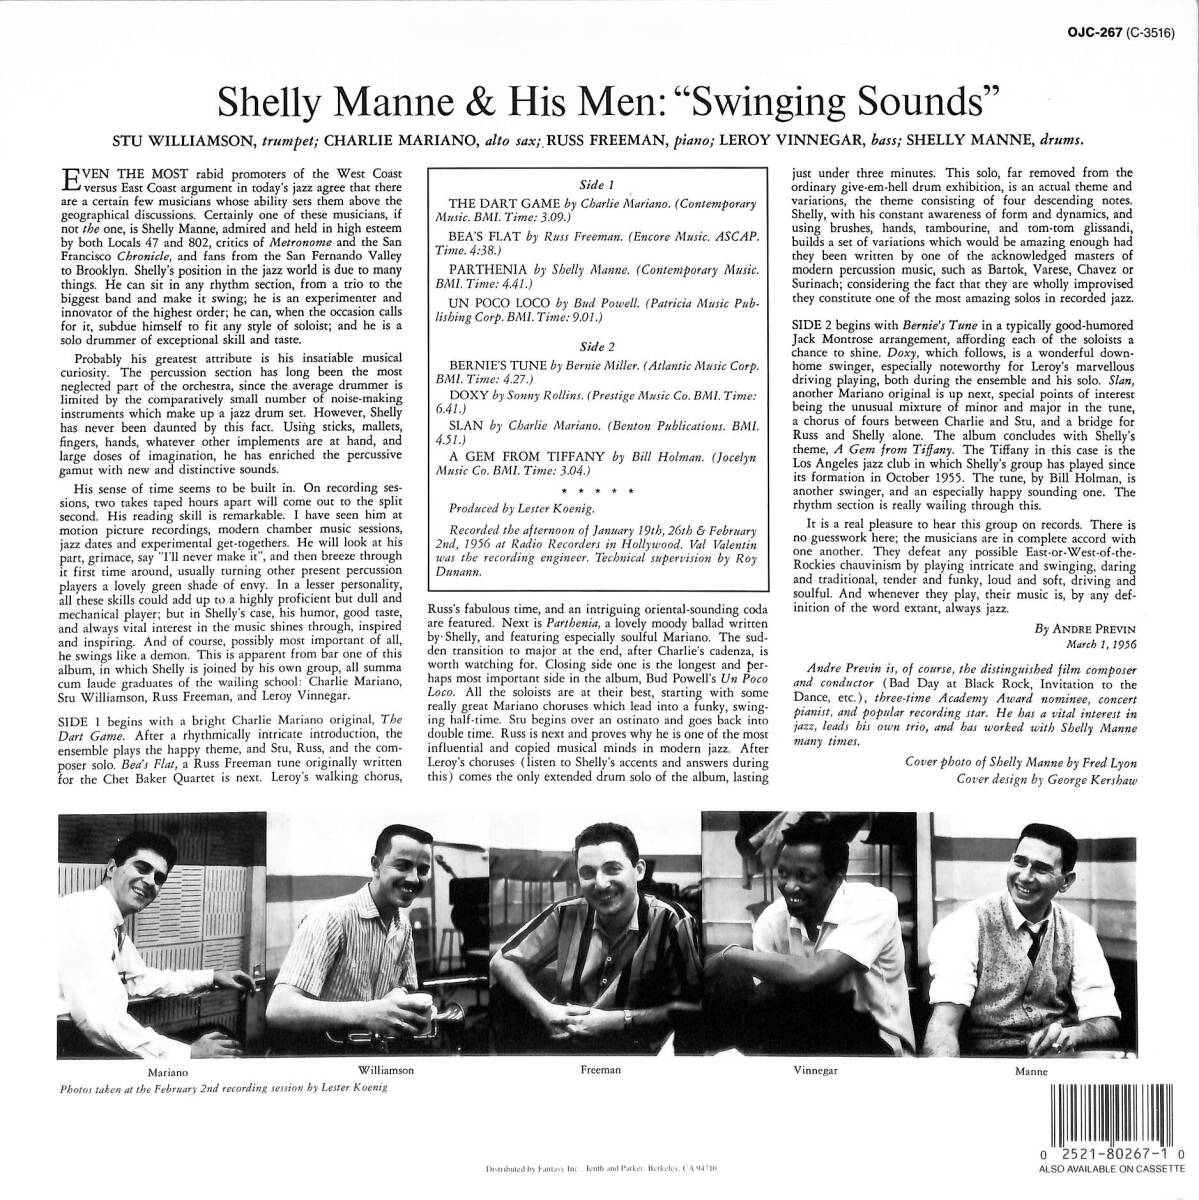 A00591691/LP/Shelly Manne & His Men「Vol. 4 : Swinging Sounds」の画像2